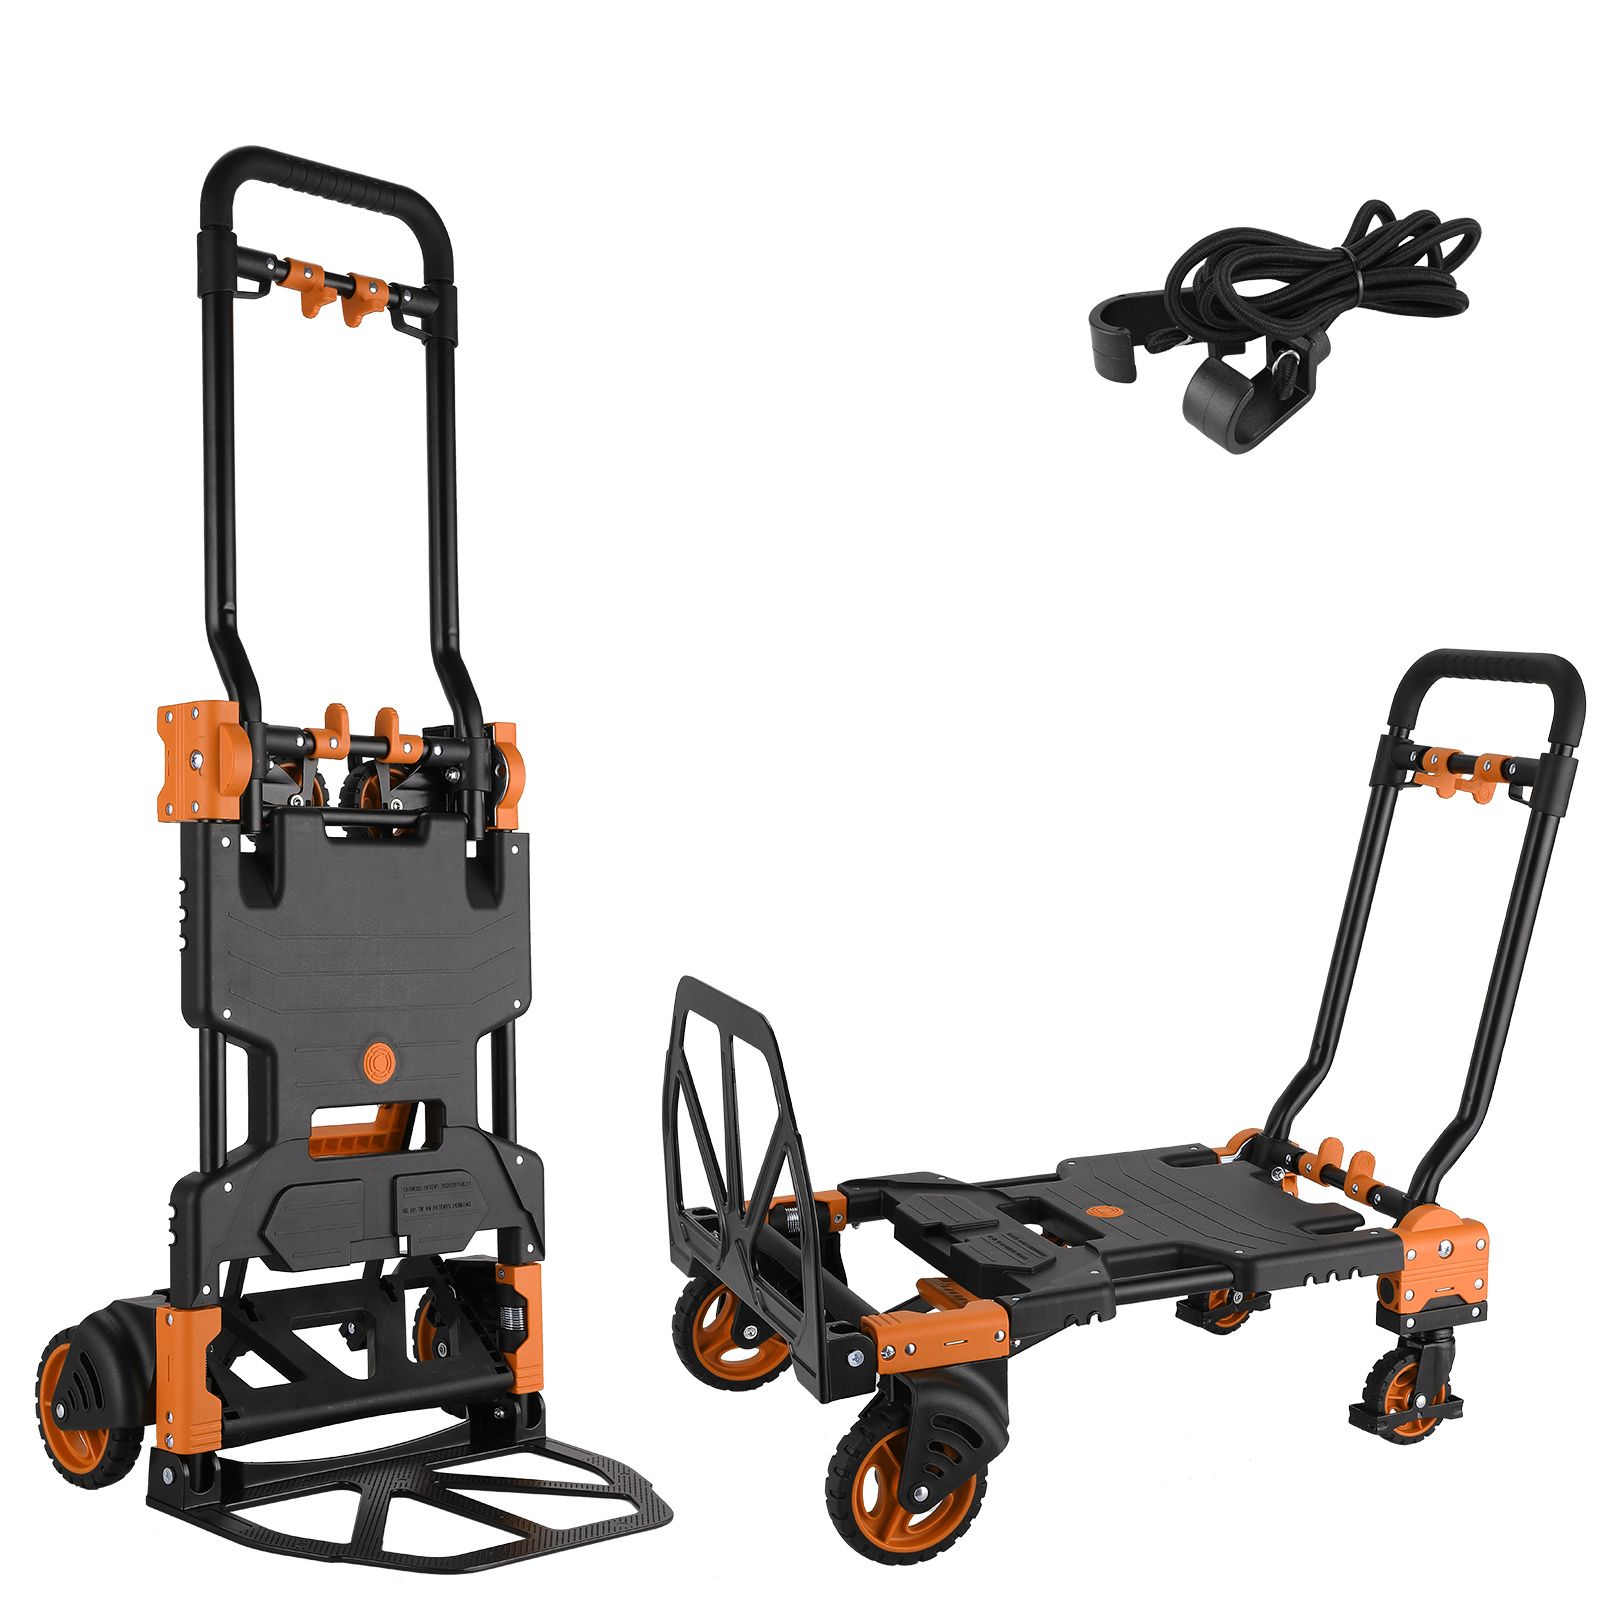 

330lb/220lb 2 In 1 Folding Hand Truck, 4 Wheels And 2 Wheels Convertible Heavy Duty Carrying, With Retractable Handle Dolly For Outdoor Office Home Carts